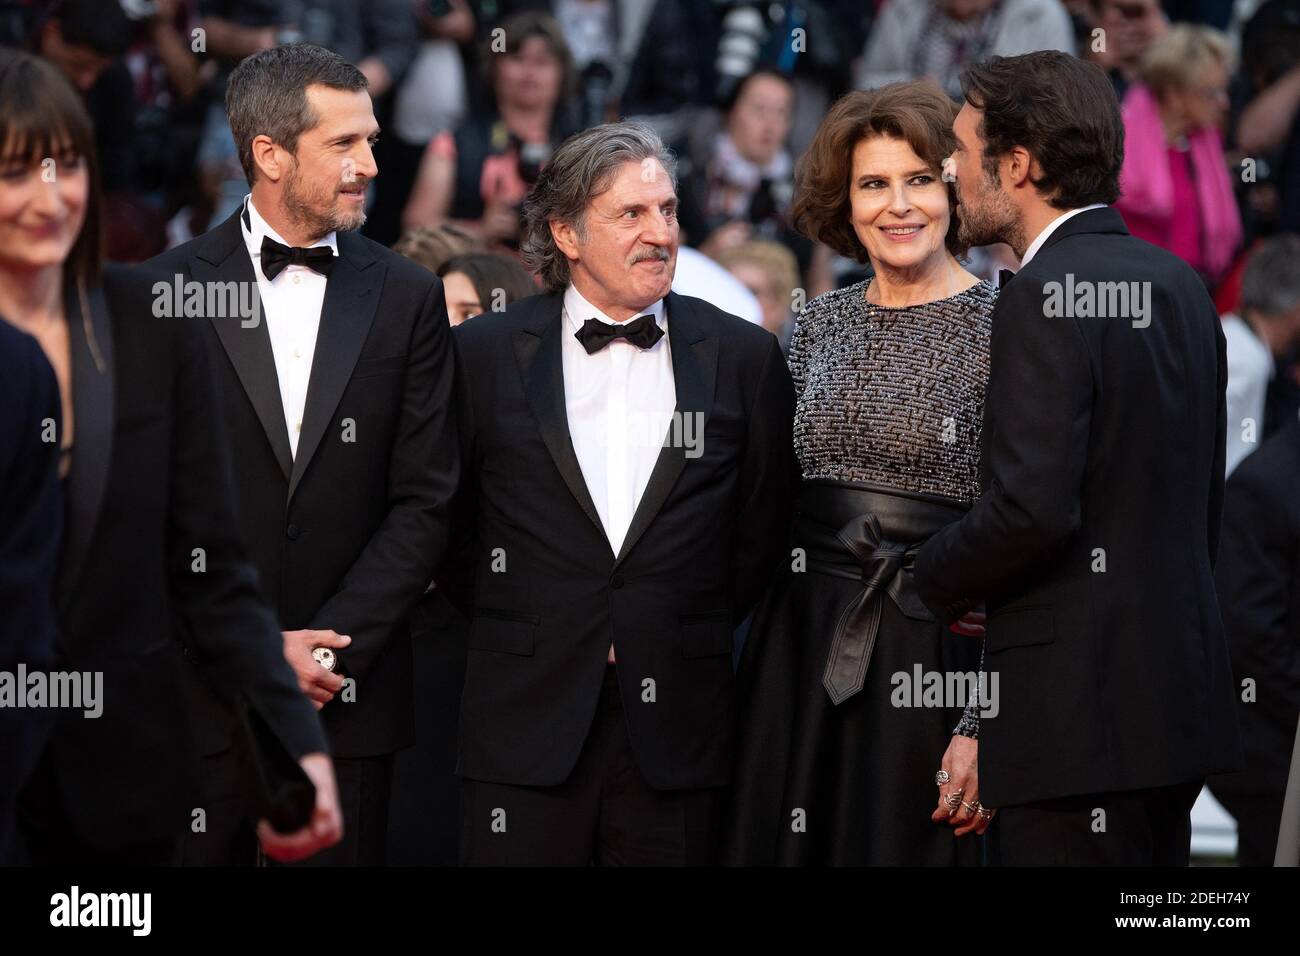 Guillaume Canet, Daniel Auteuil, Fanny Ardant and Nicolas Bedos attend ...